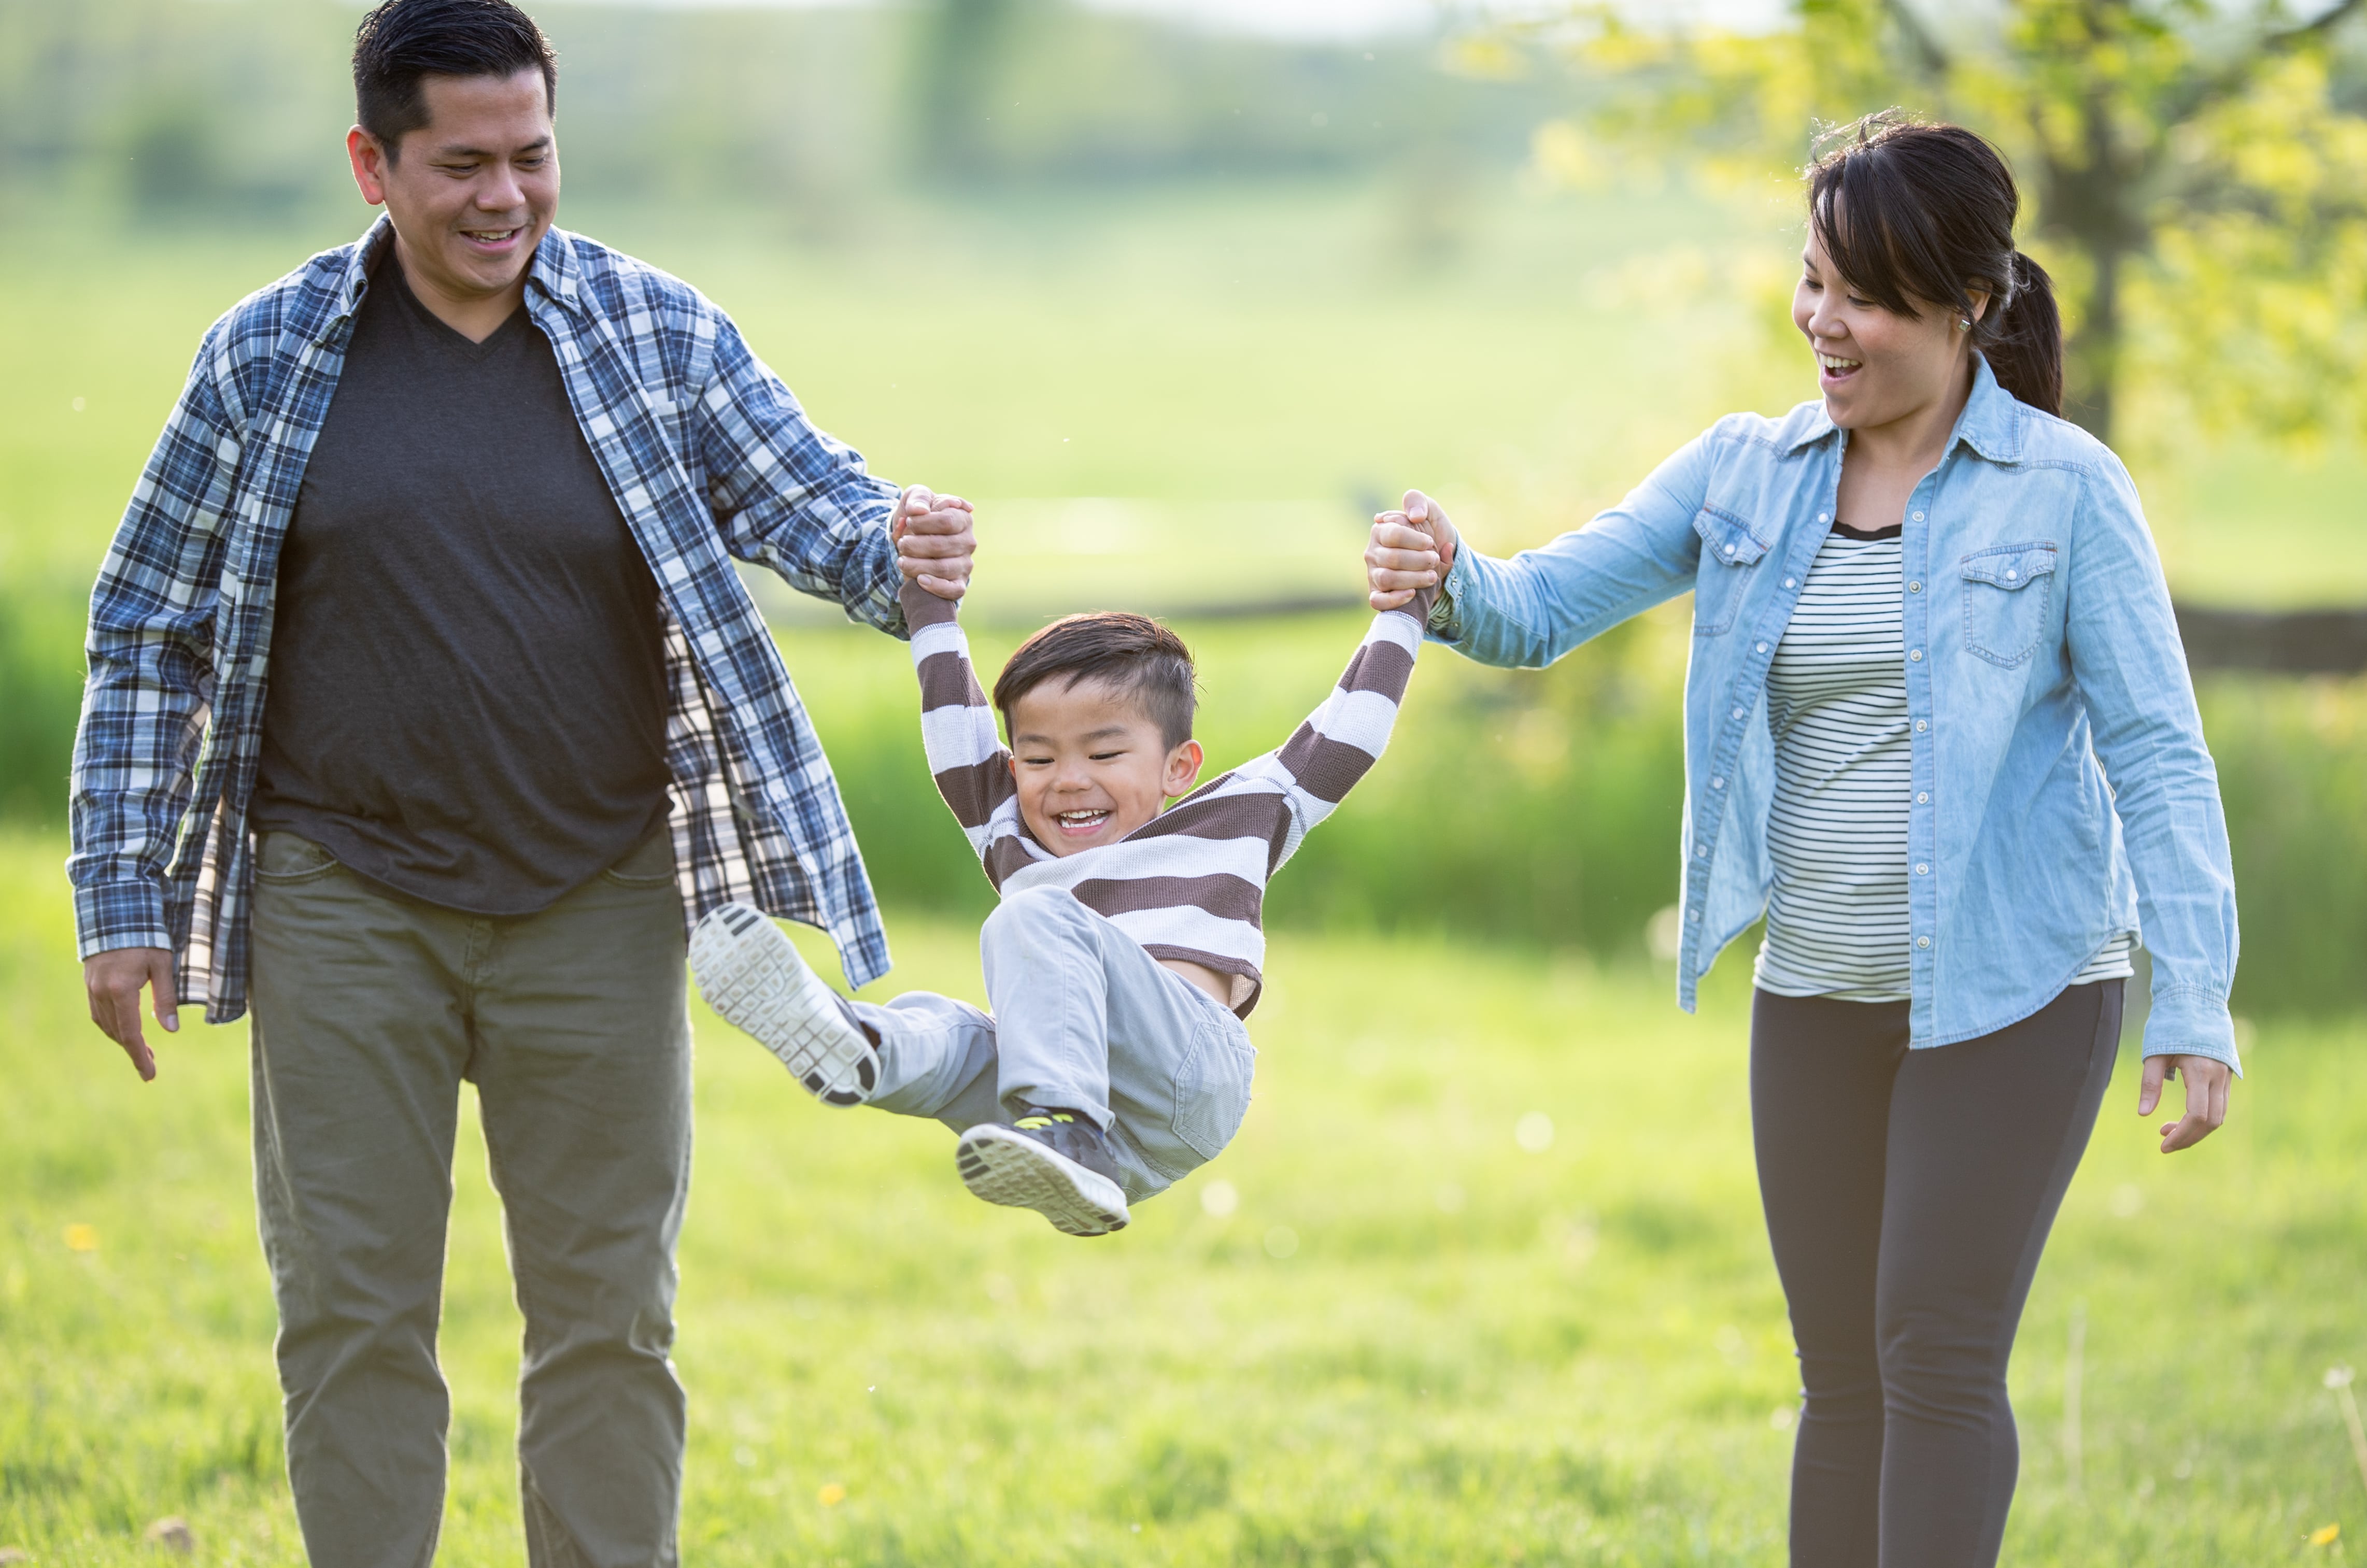 Man and woman in a field holding the hands of their smiling son and swinging him